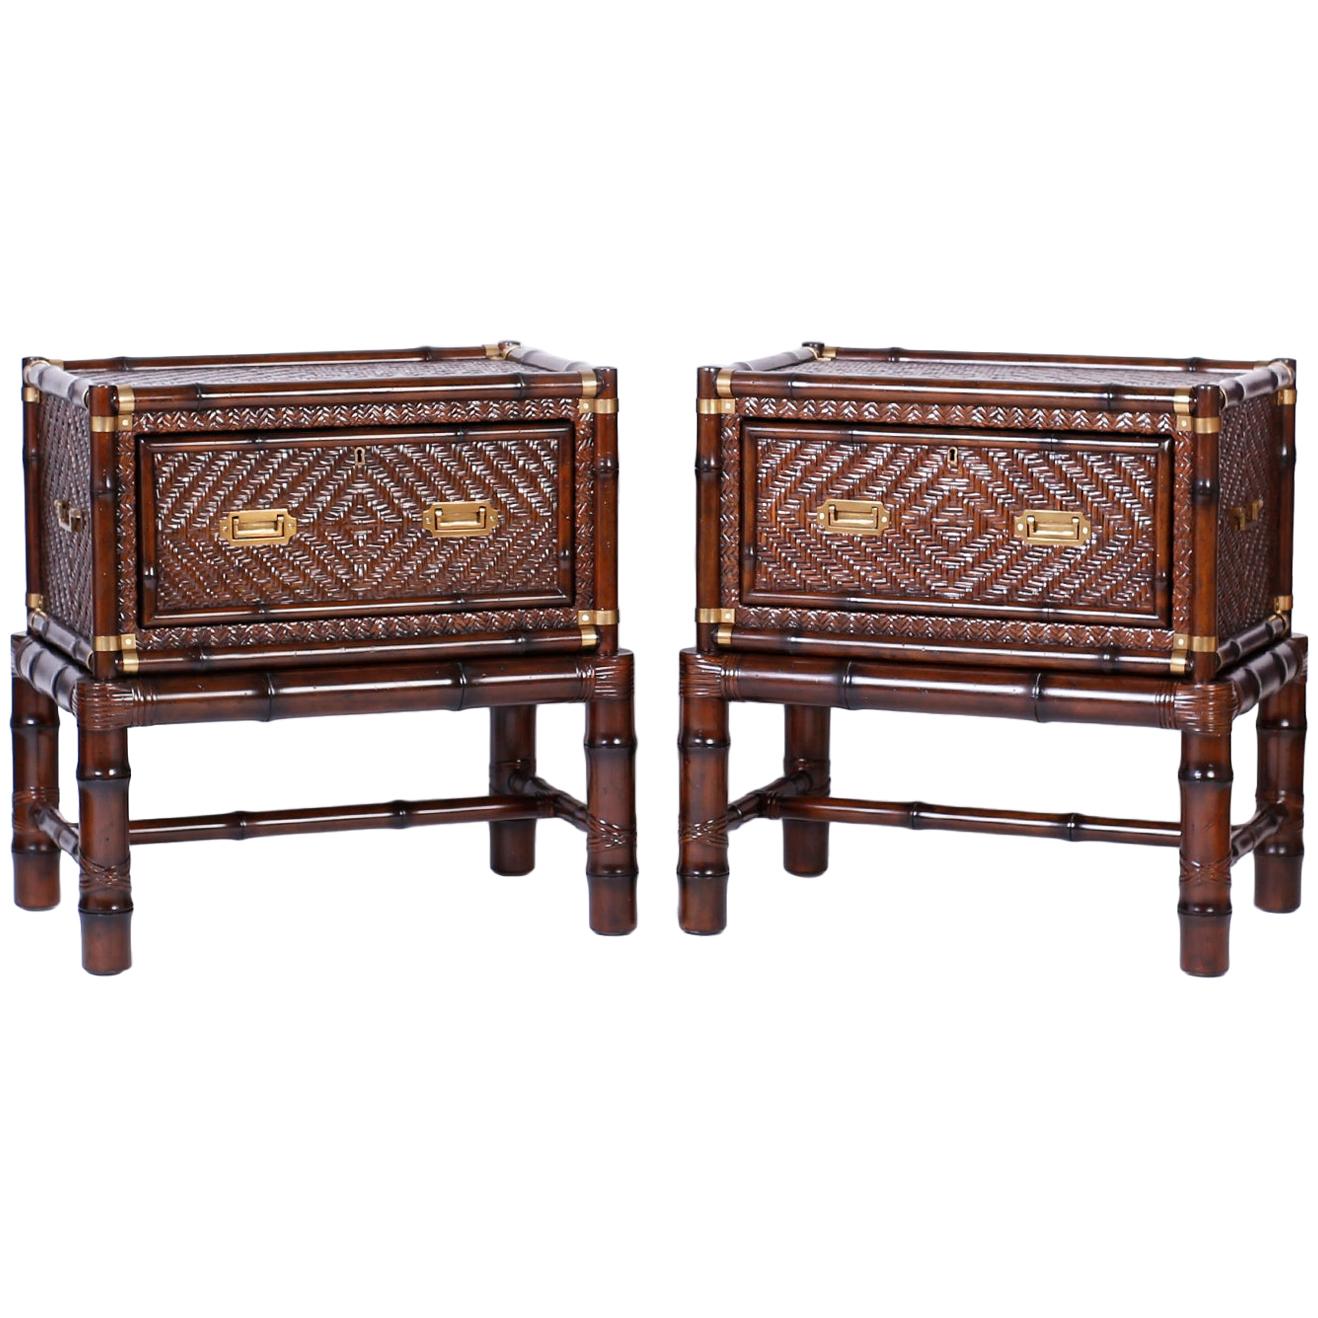 Pair of Faux Bamboo and Rattan British Colonial Chests on Stands or Tables